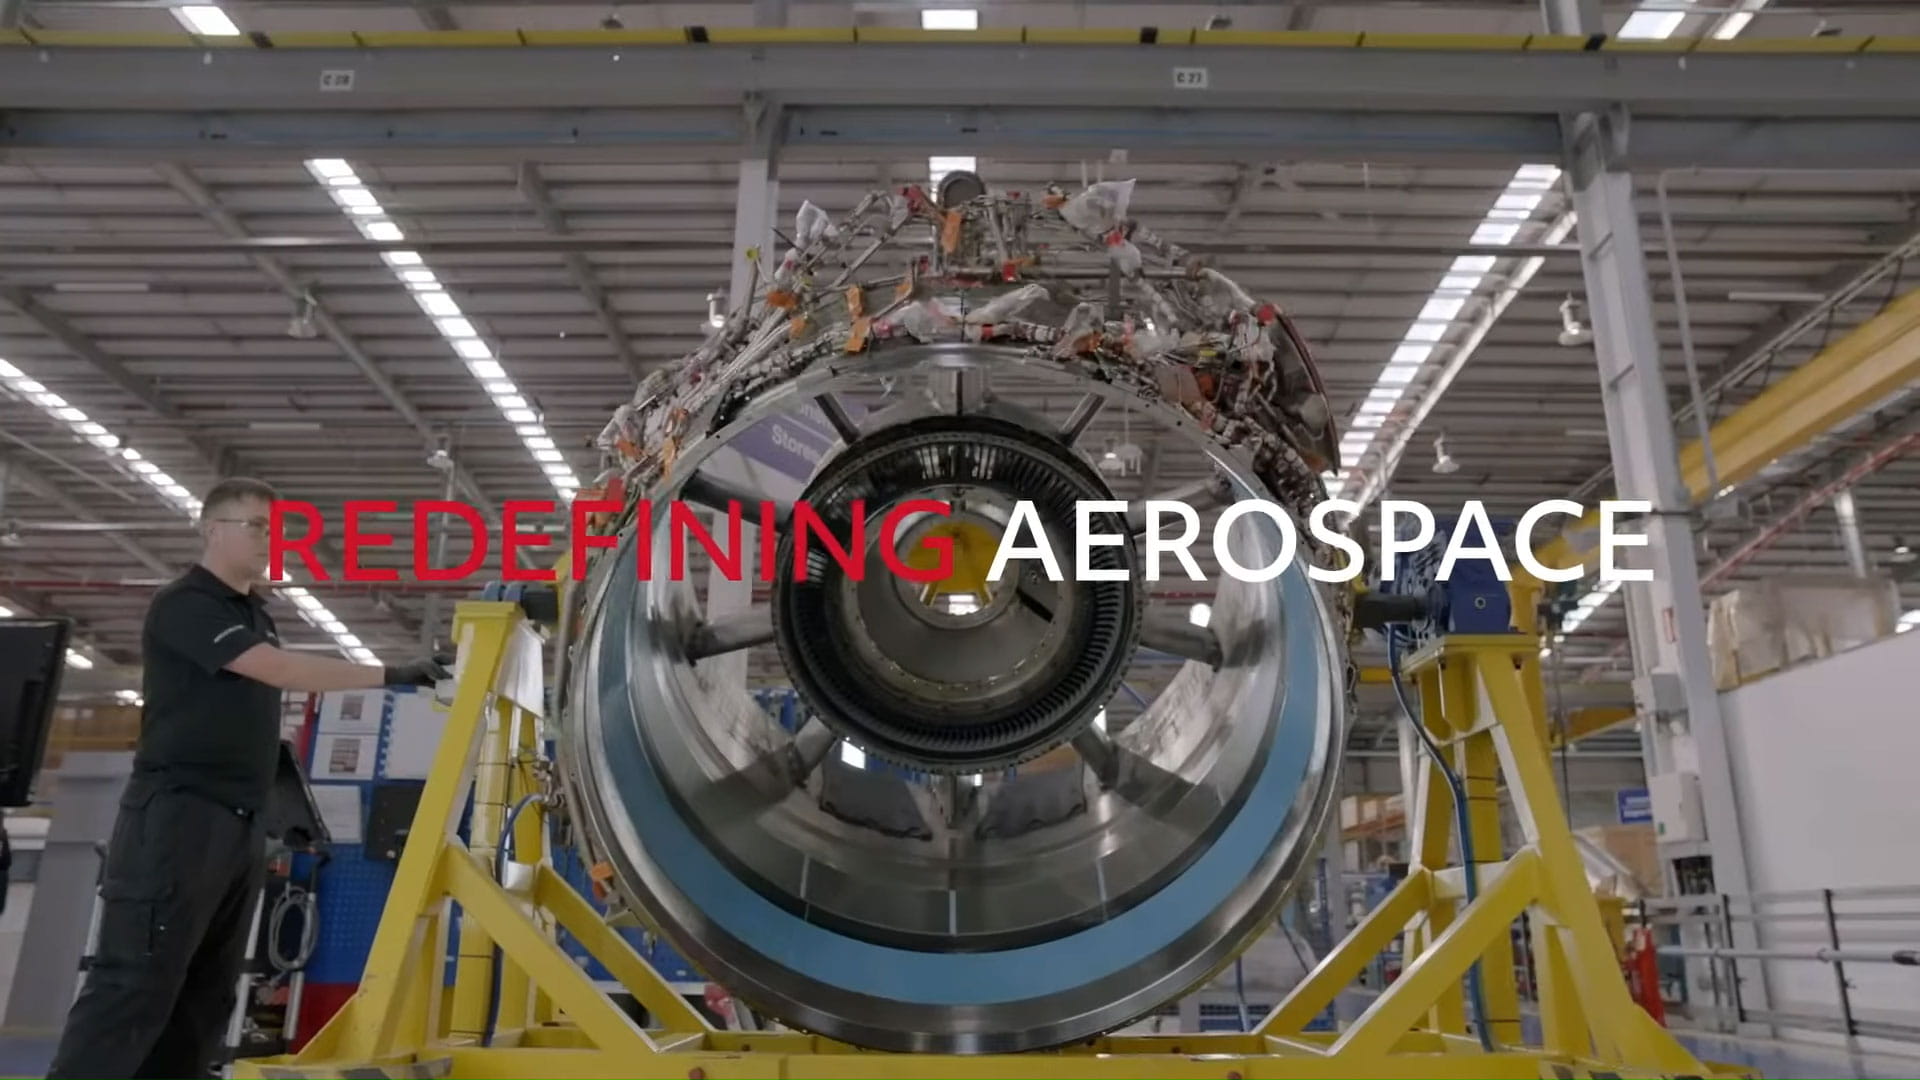 A technician works on a large piece of machinery. The text 'Redefining Aerospace' overlays the image.